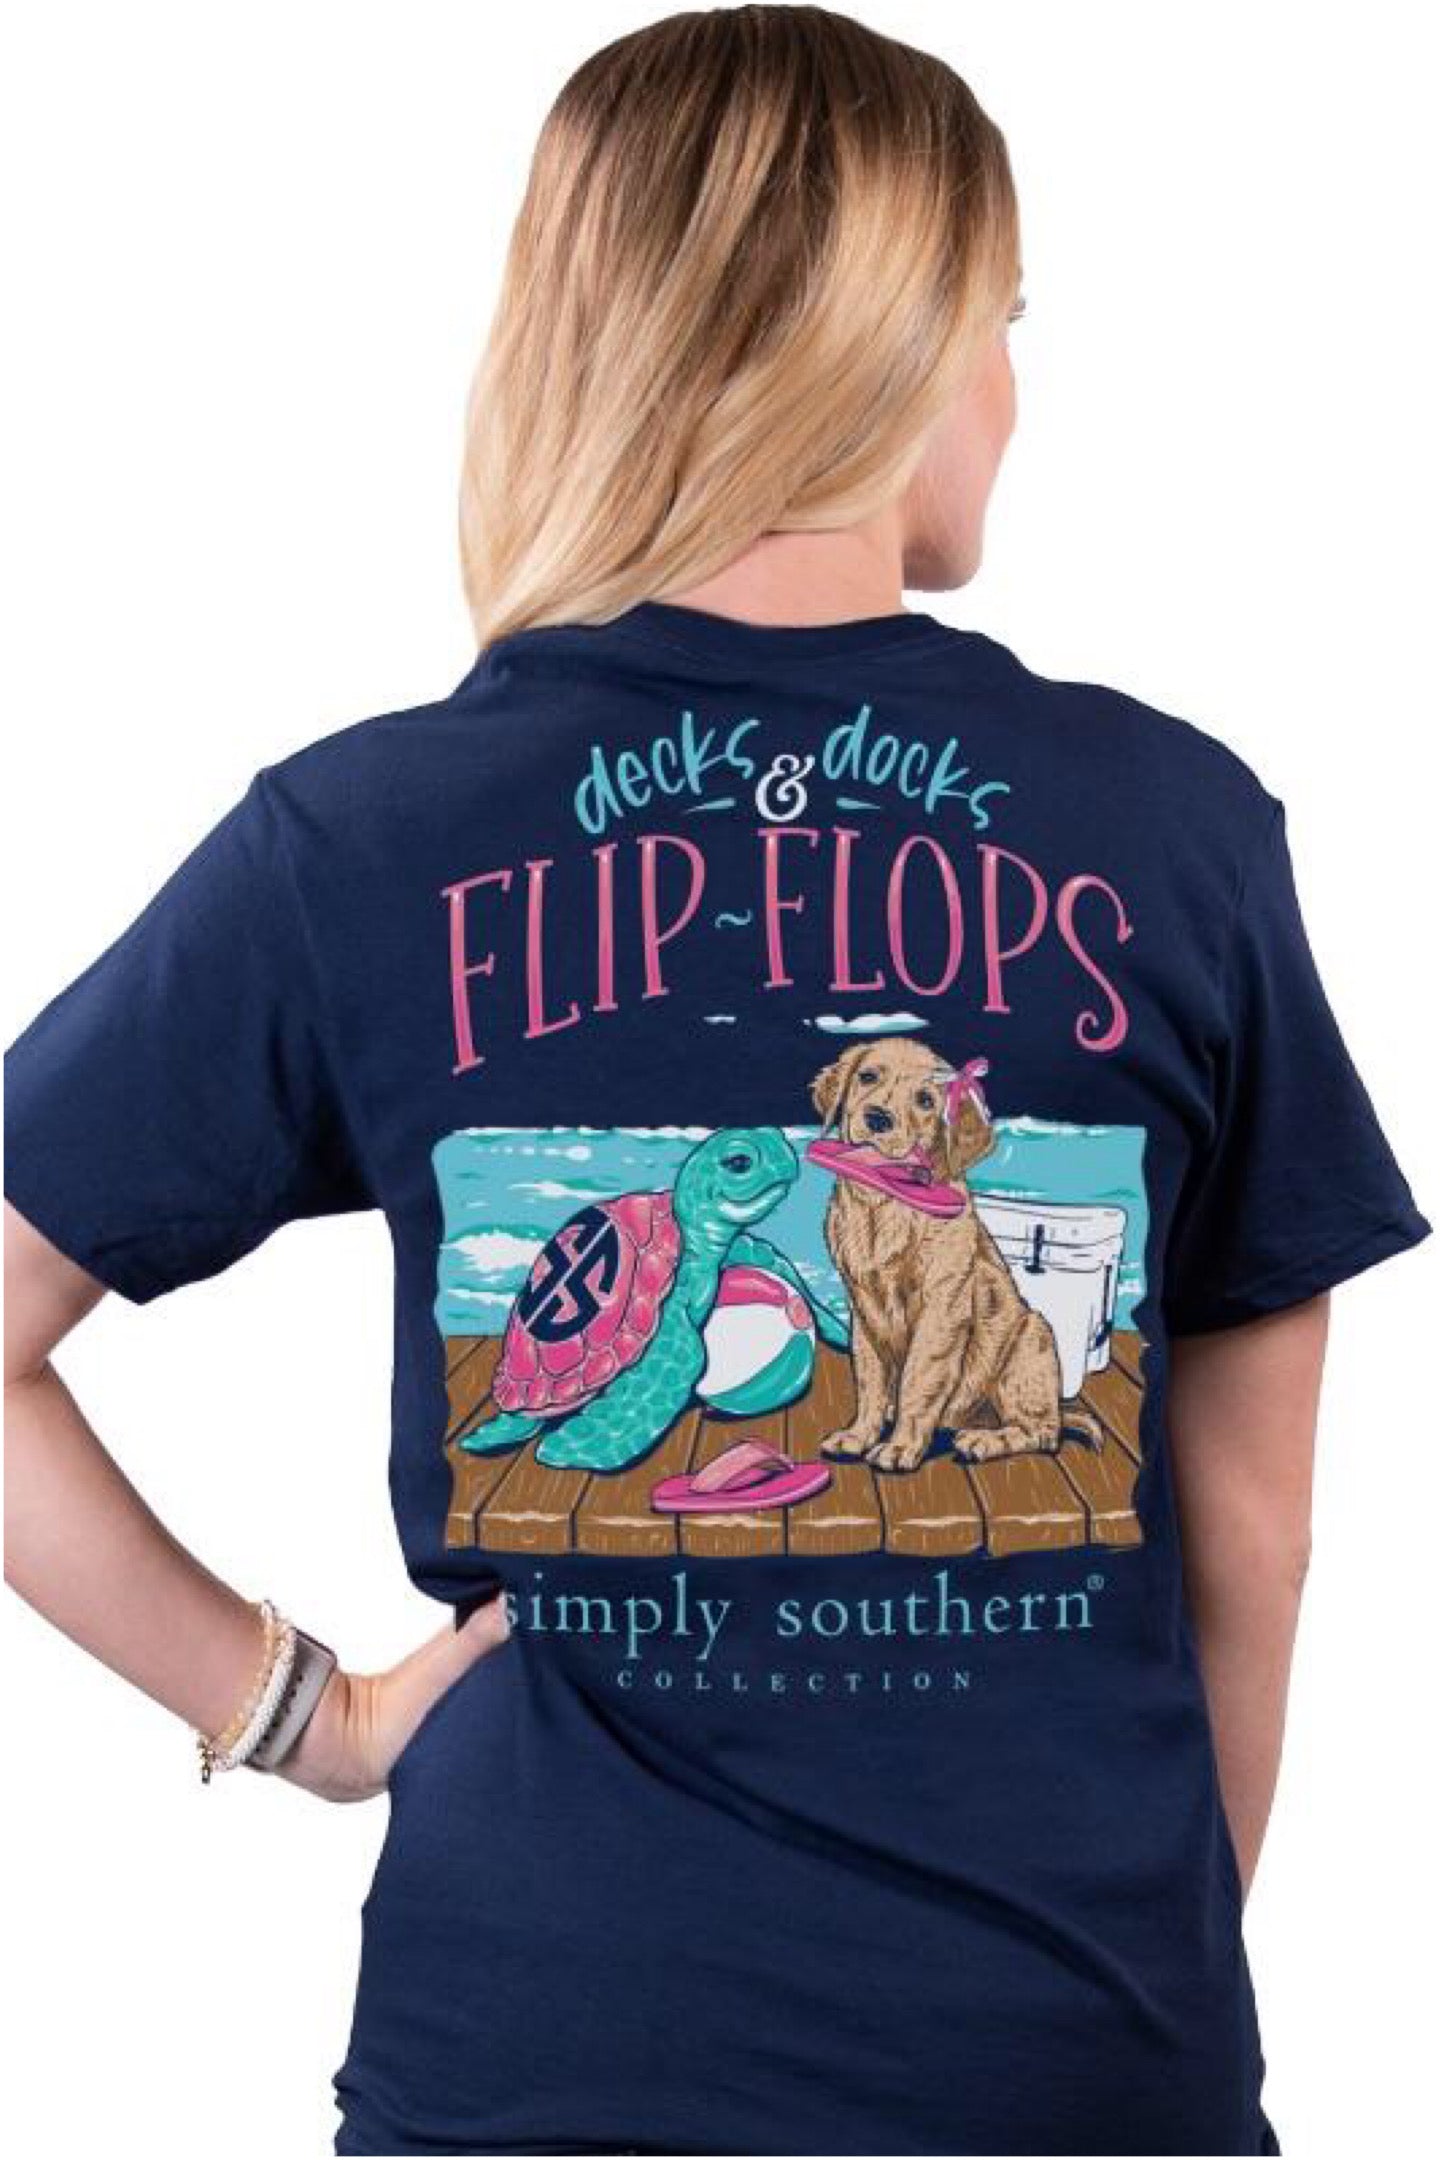 “Flipflop" Short Sleeve Tee by Simply Southern